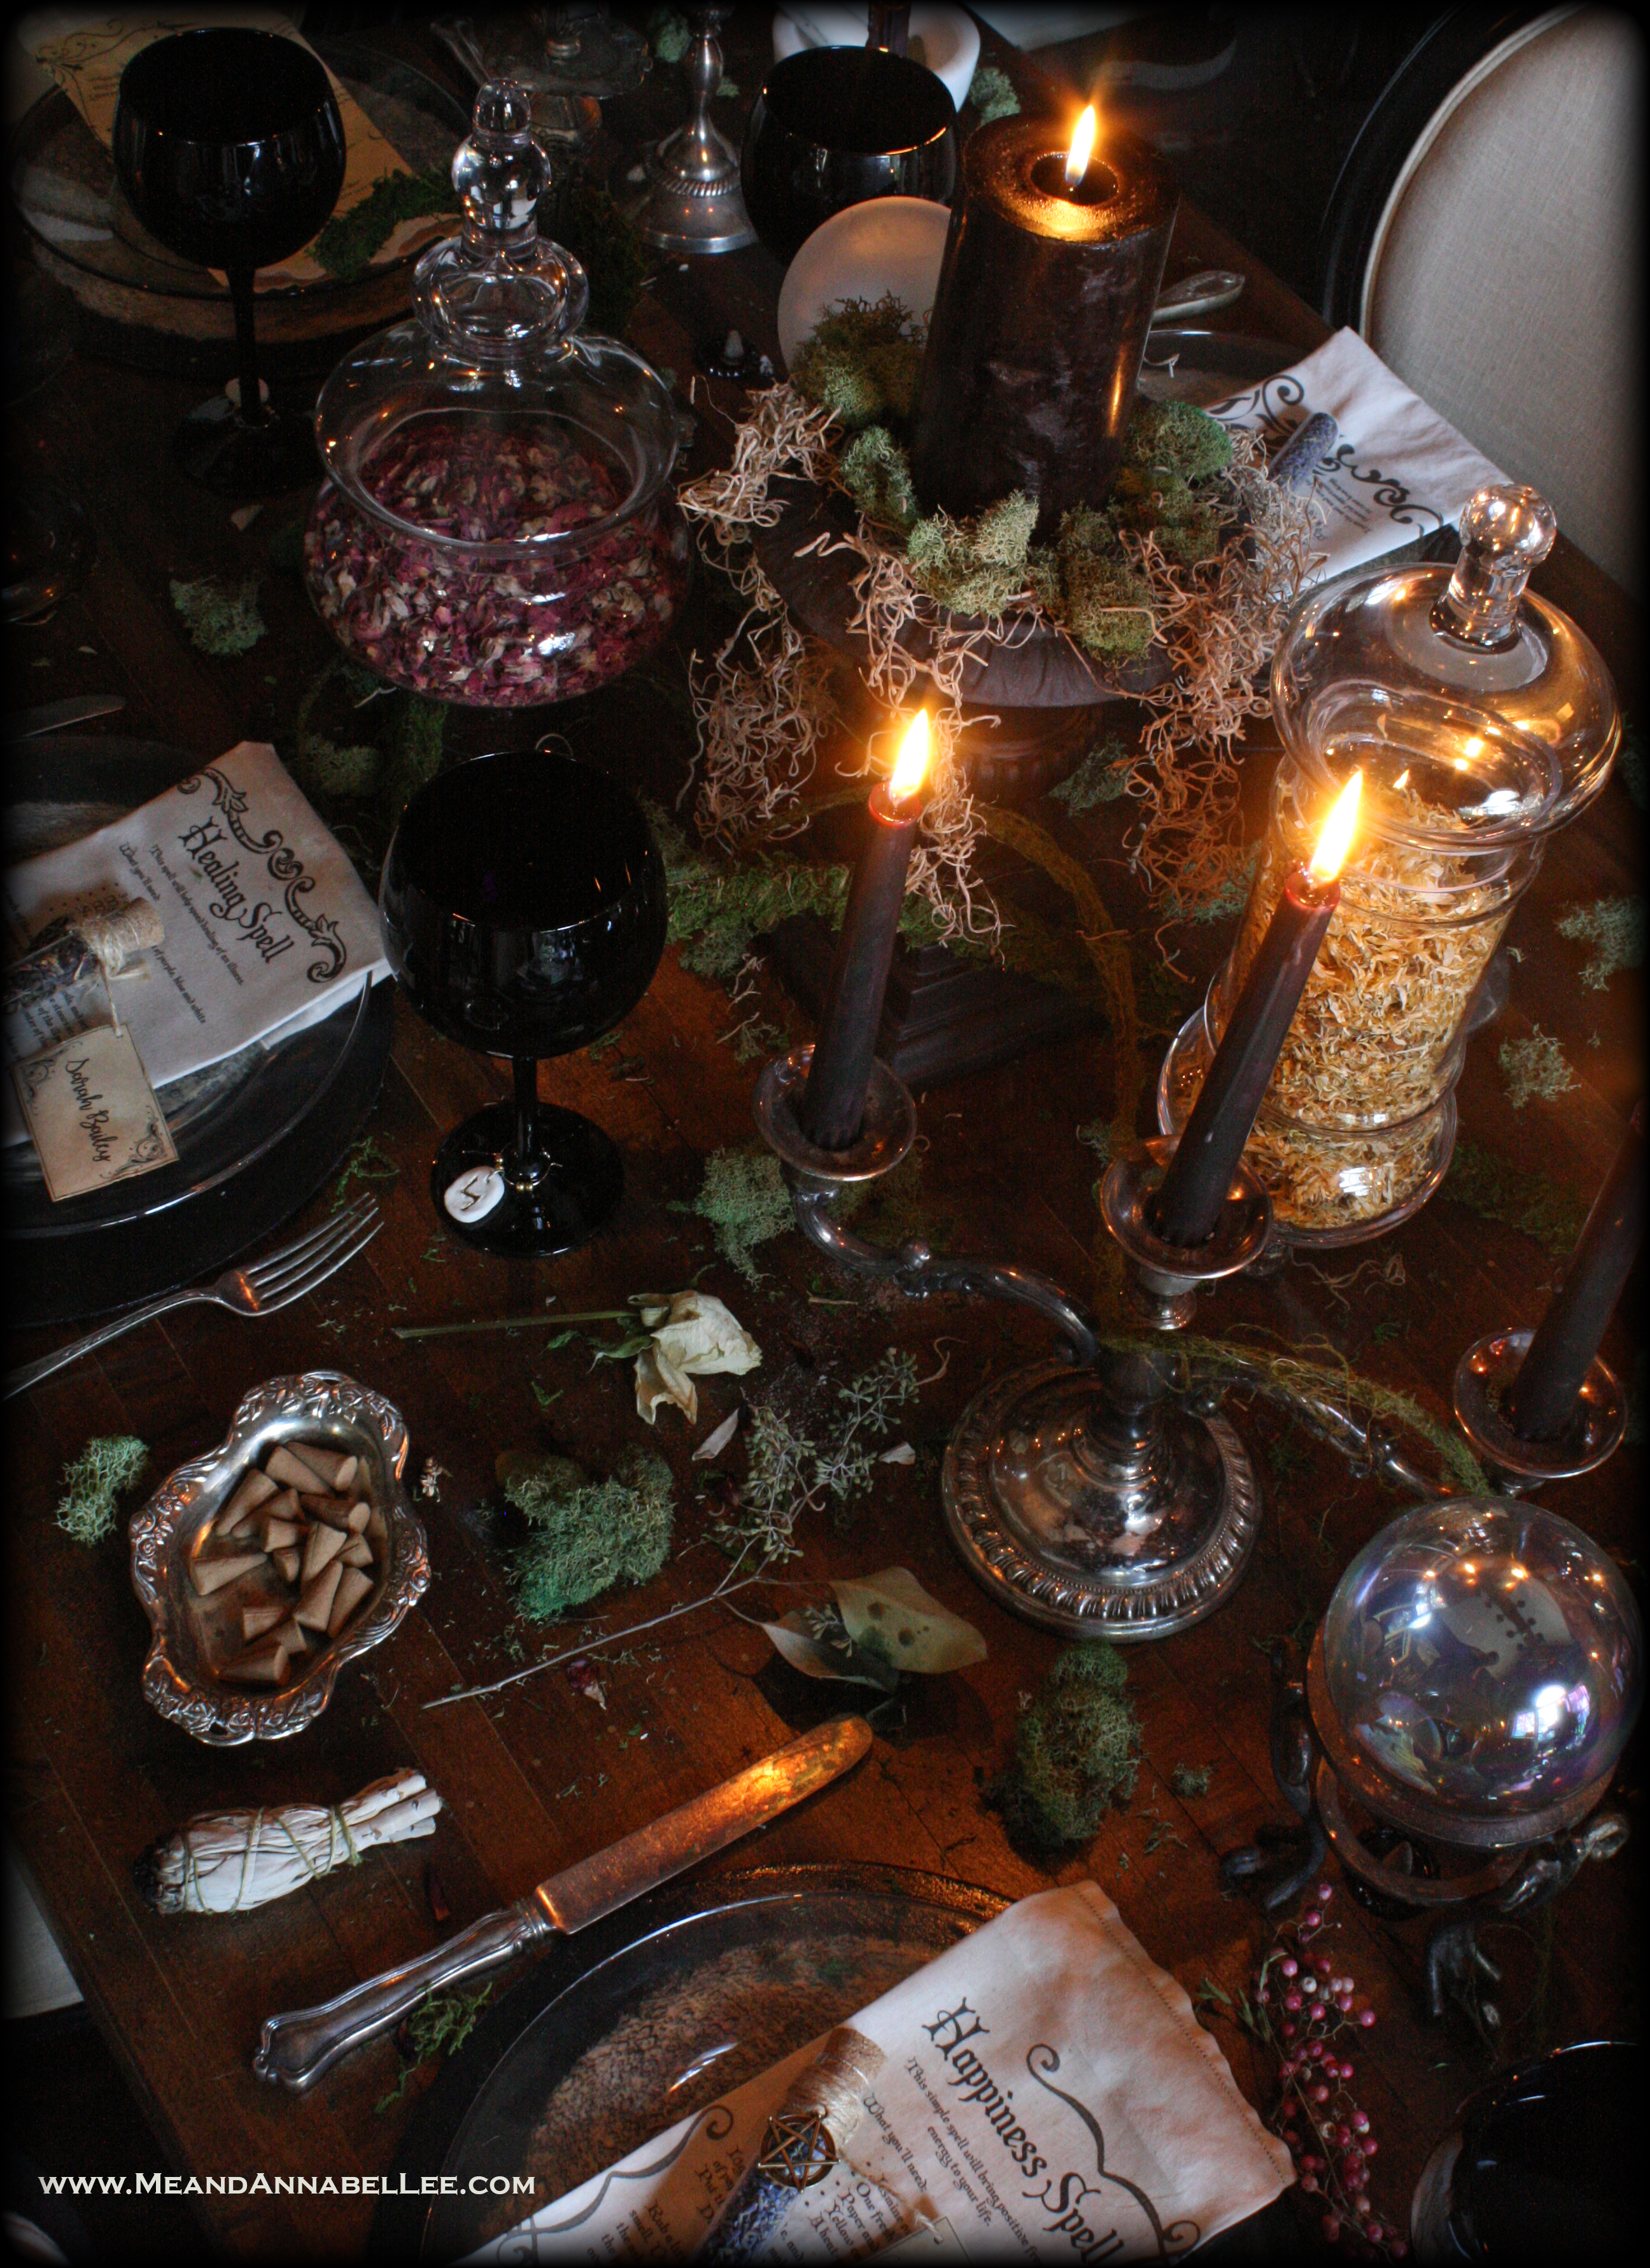 Witches Dinner Party | Antique Gothic Candelabra | Incense | Smoke Filled Crystal Balls | Apothecary Jars | Elegant Halloween Table | Sage Smudging Bundles | Goth Decor | www.MeandAnnabelLee.com